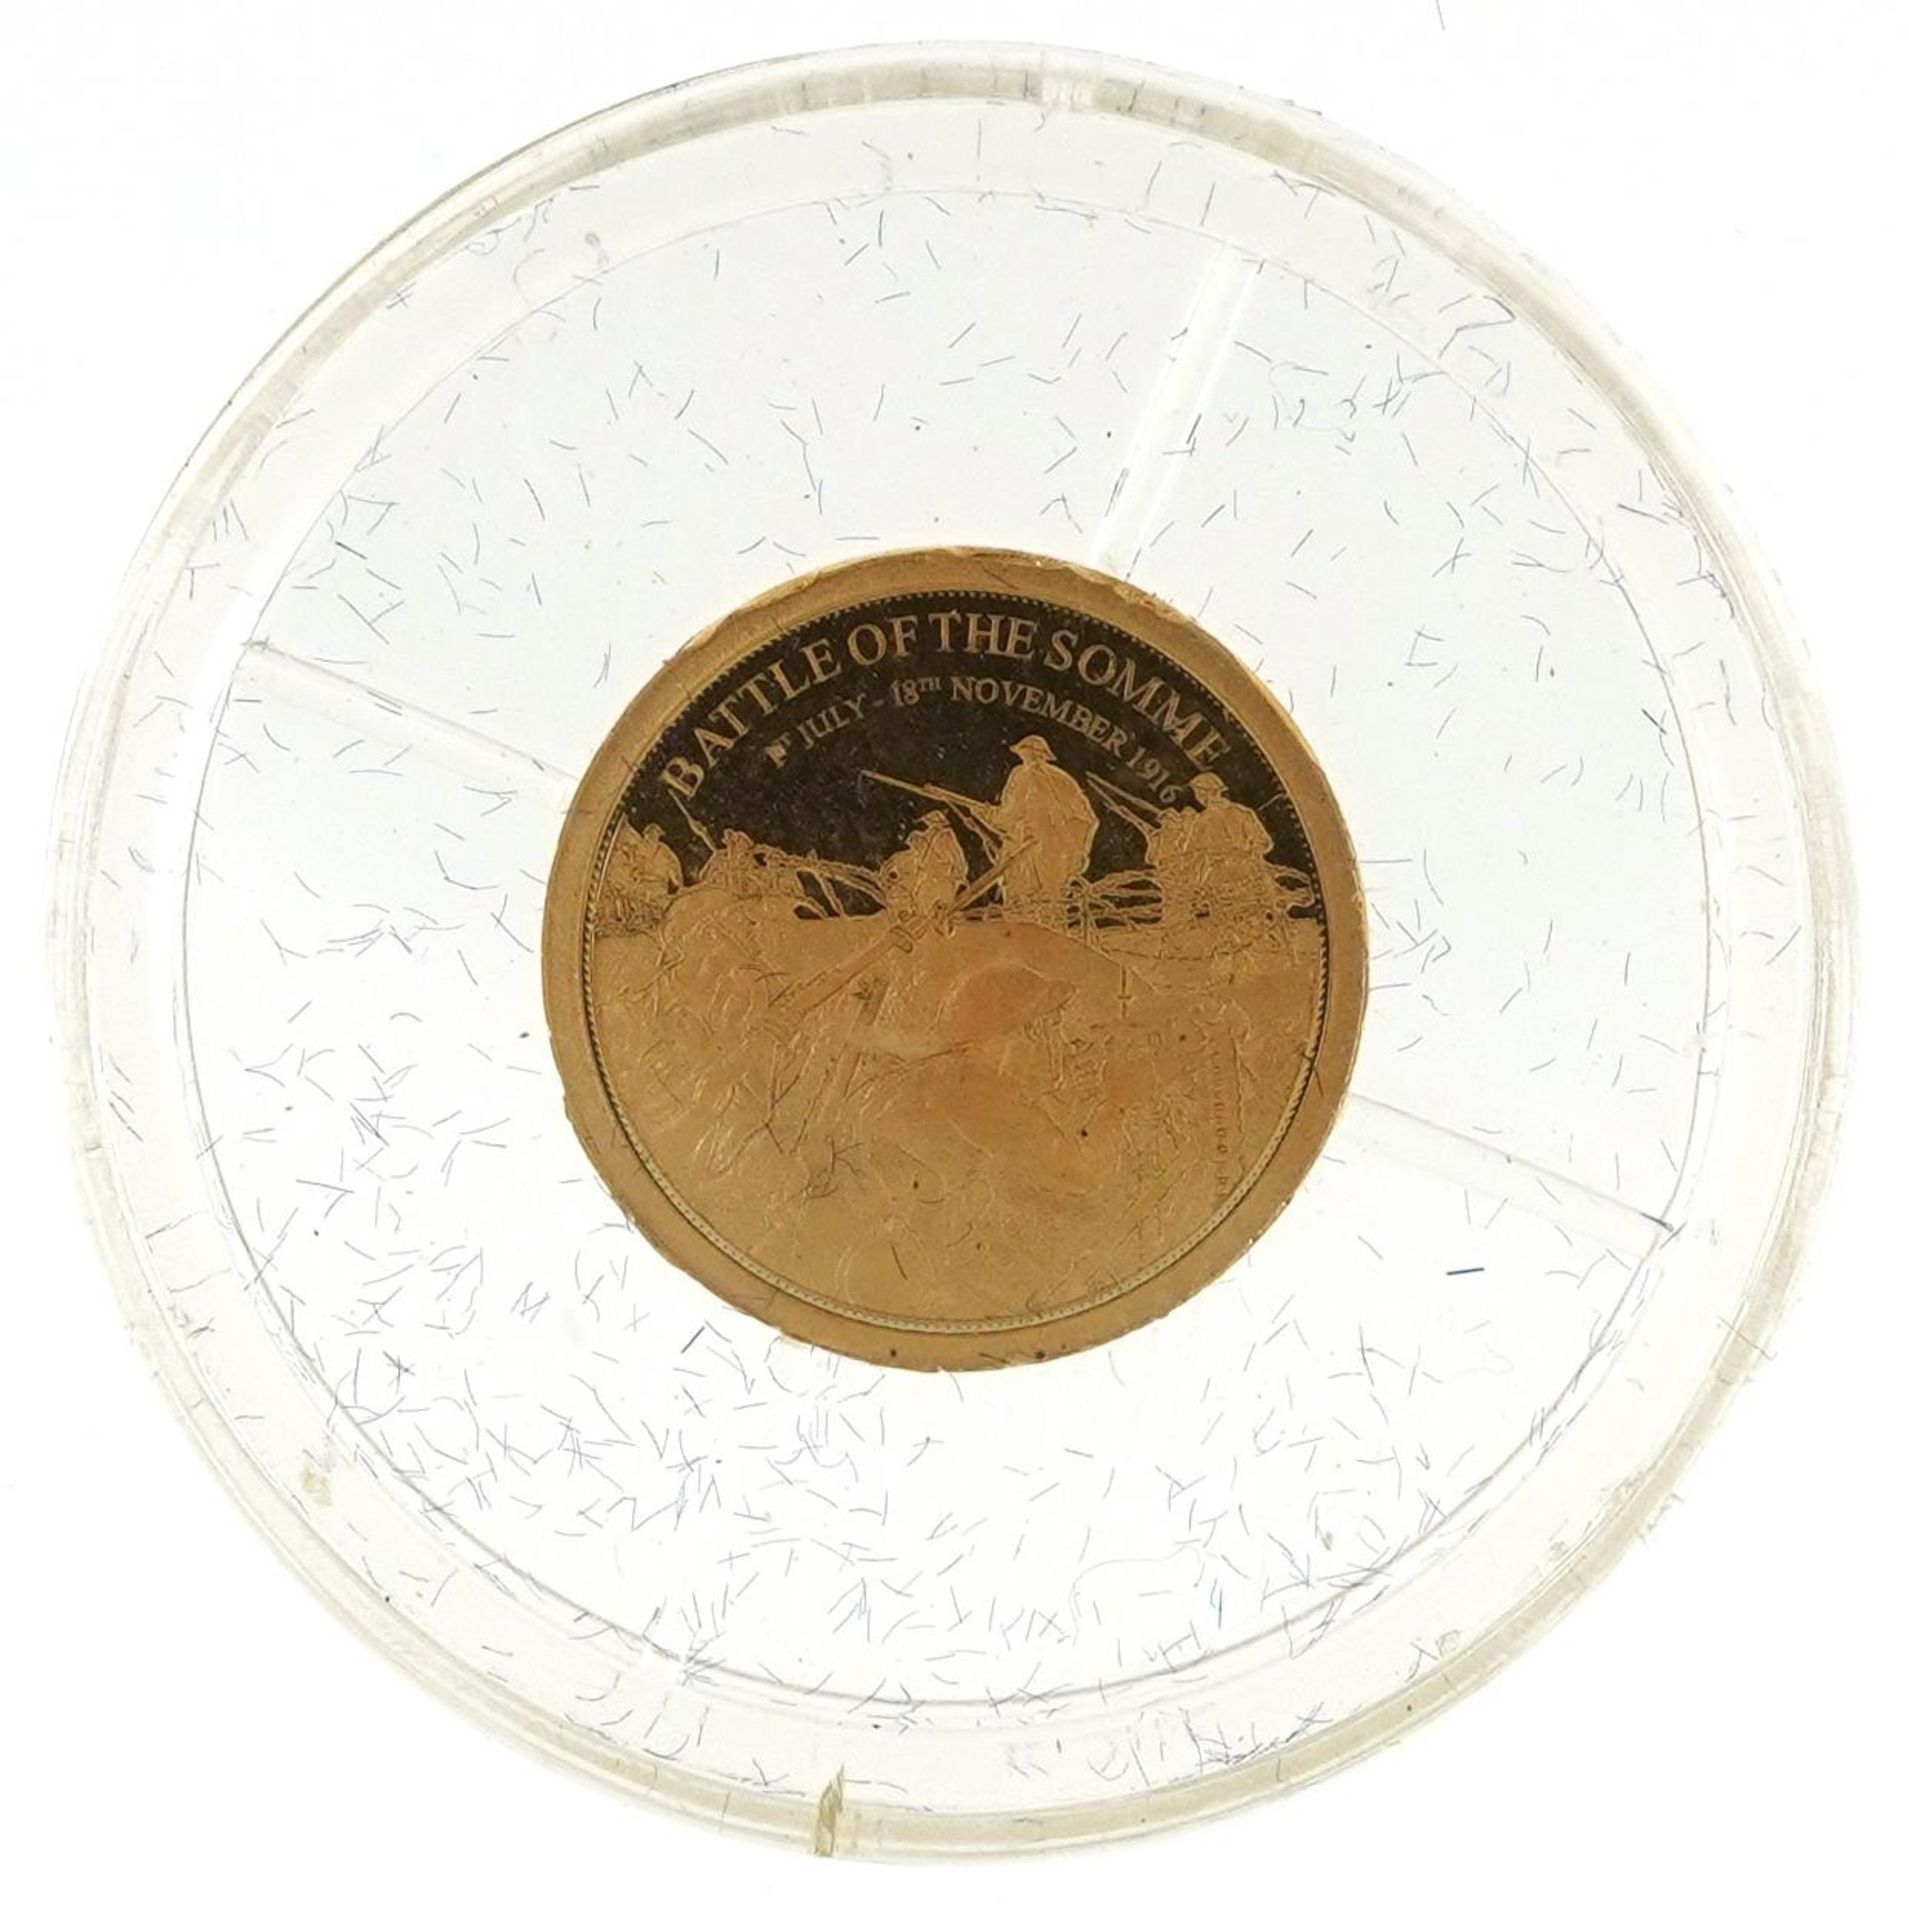 14ct gold History of Britain Battle of the Somme miniature gold coin : For further information on